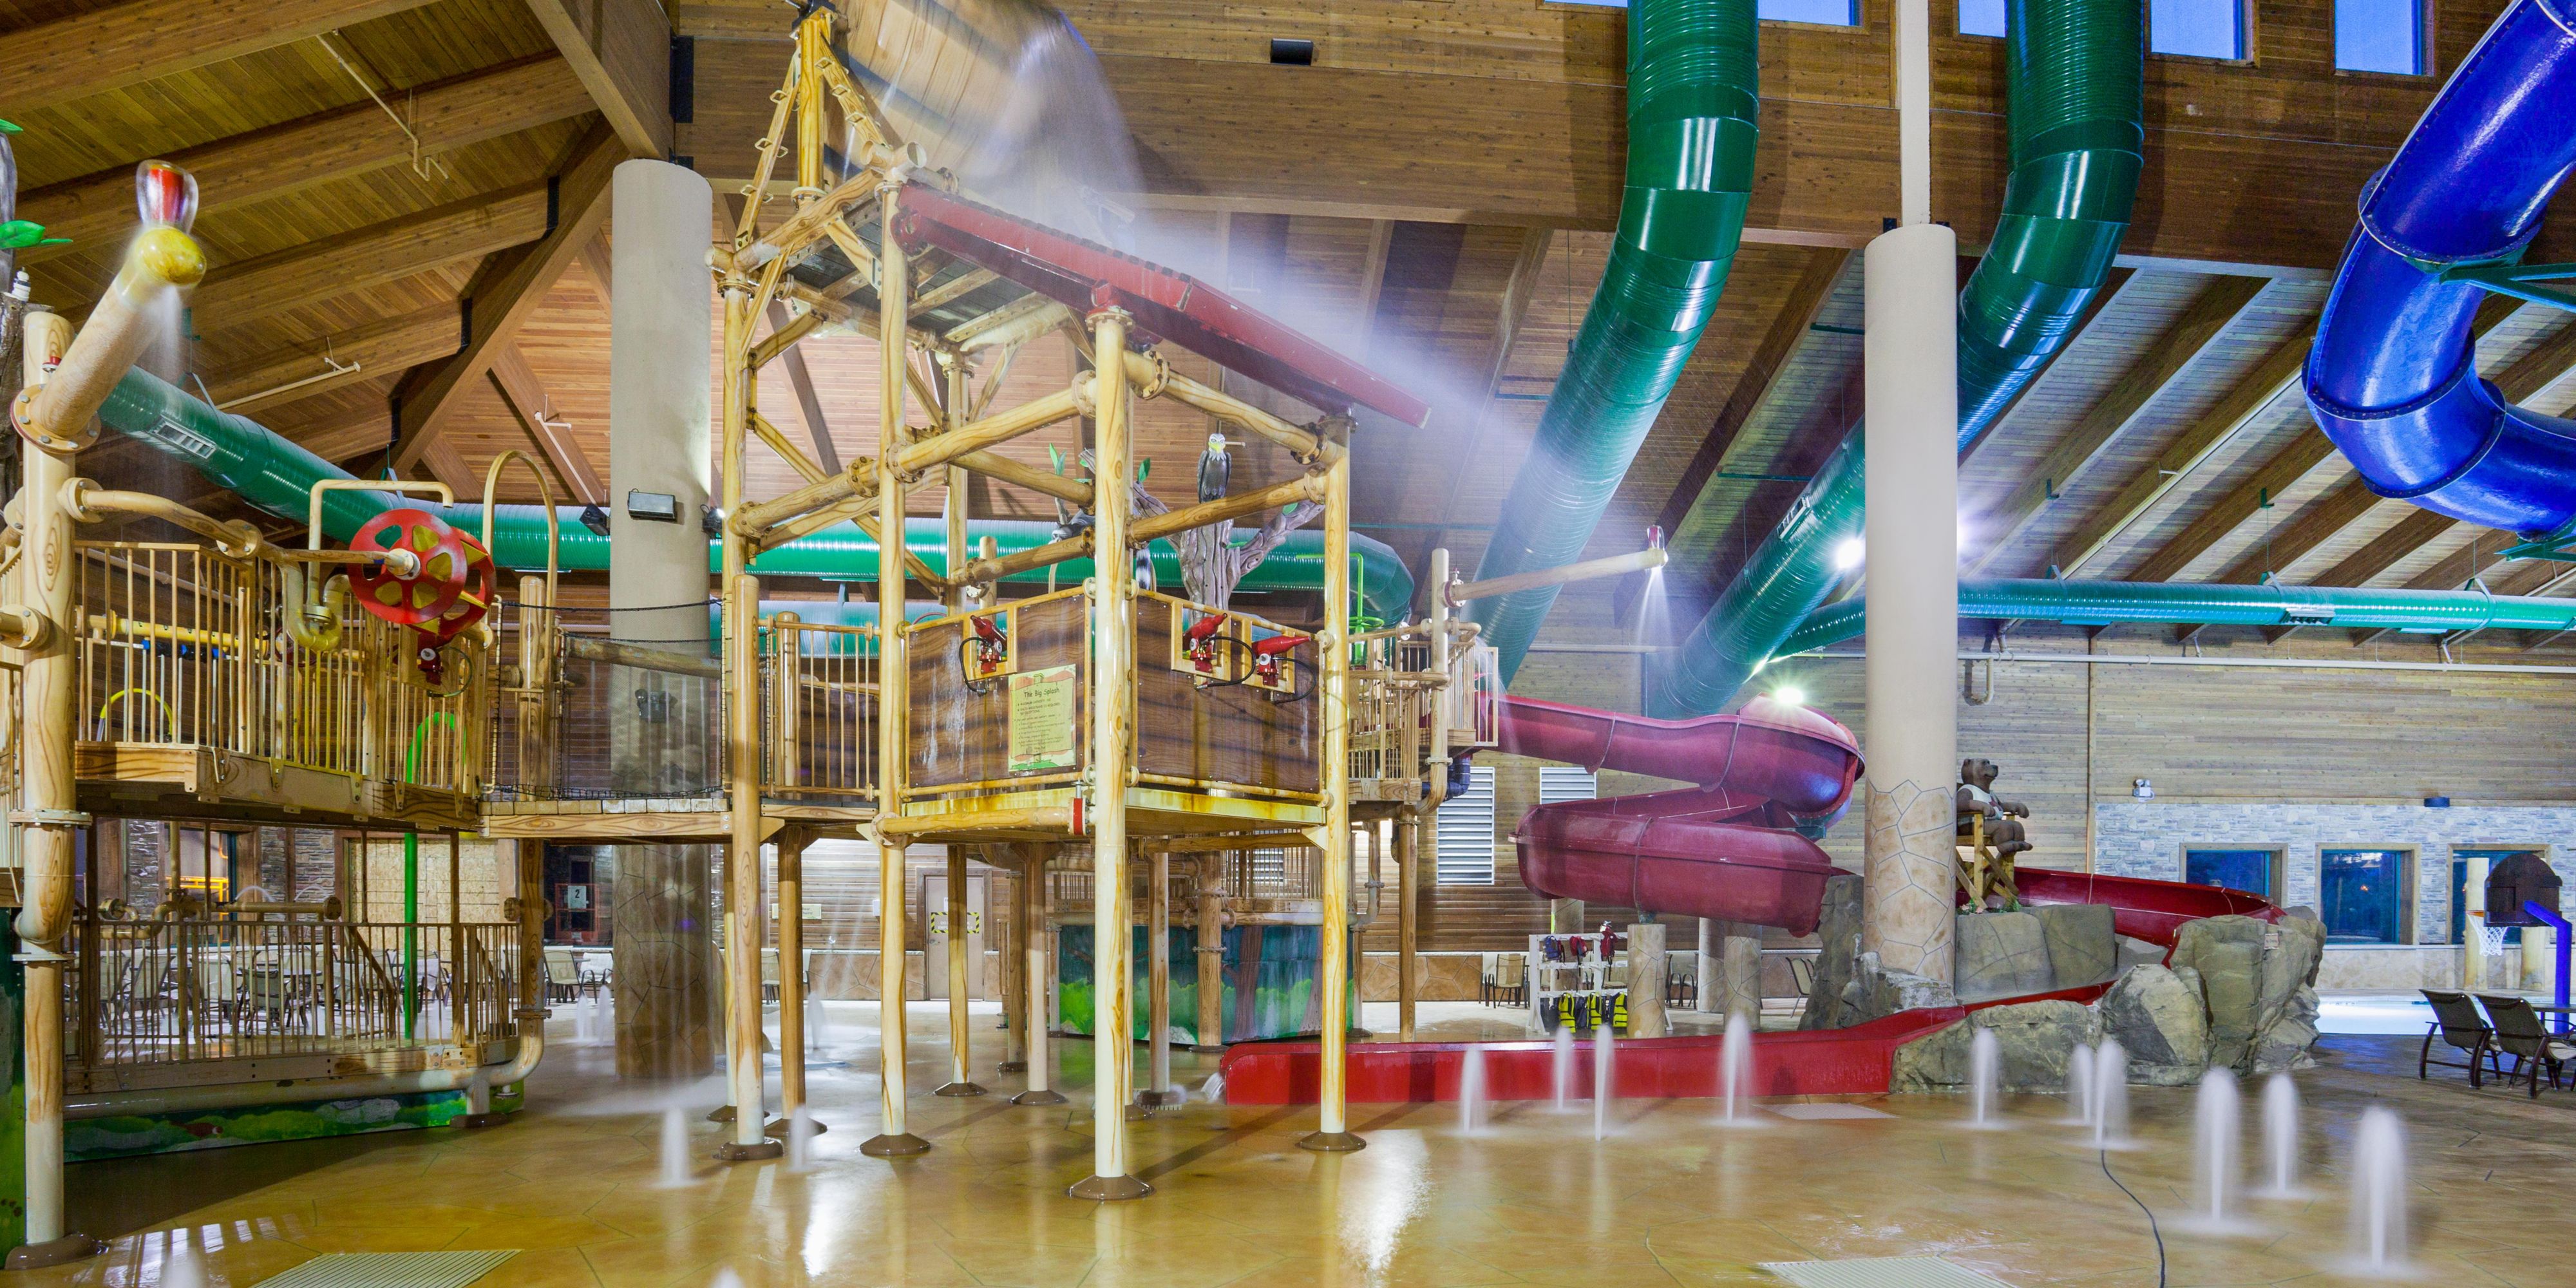 Our hotel has exciting Water Park Amenities available to hotel guests, please refer to the link for our current Water Park Hours!